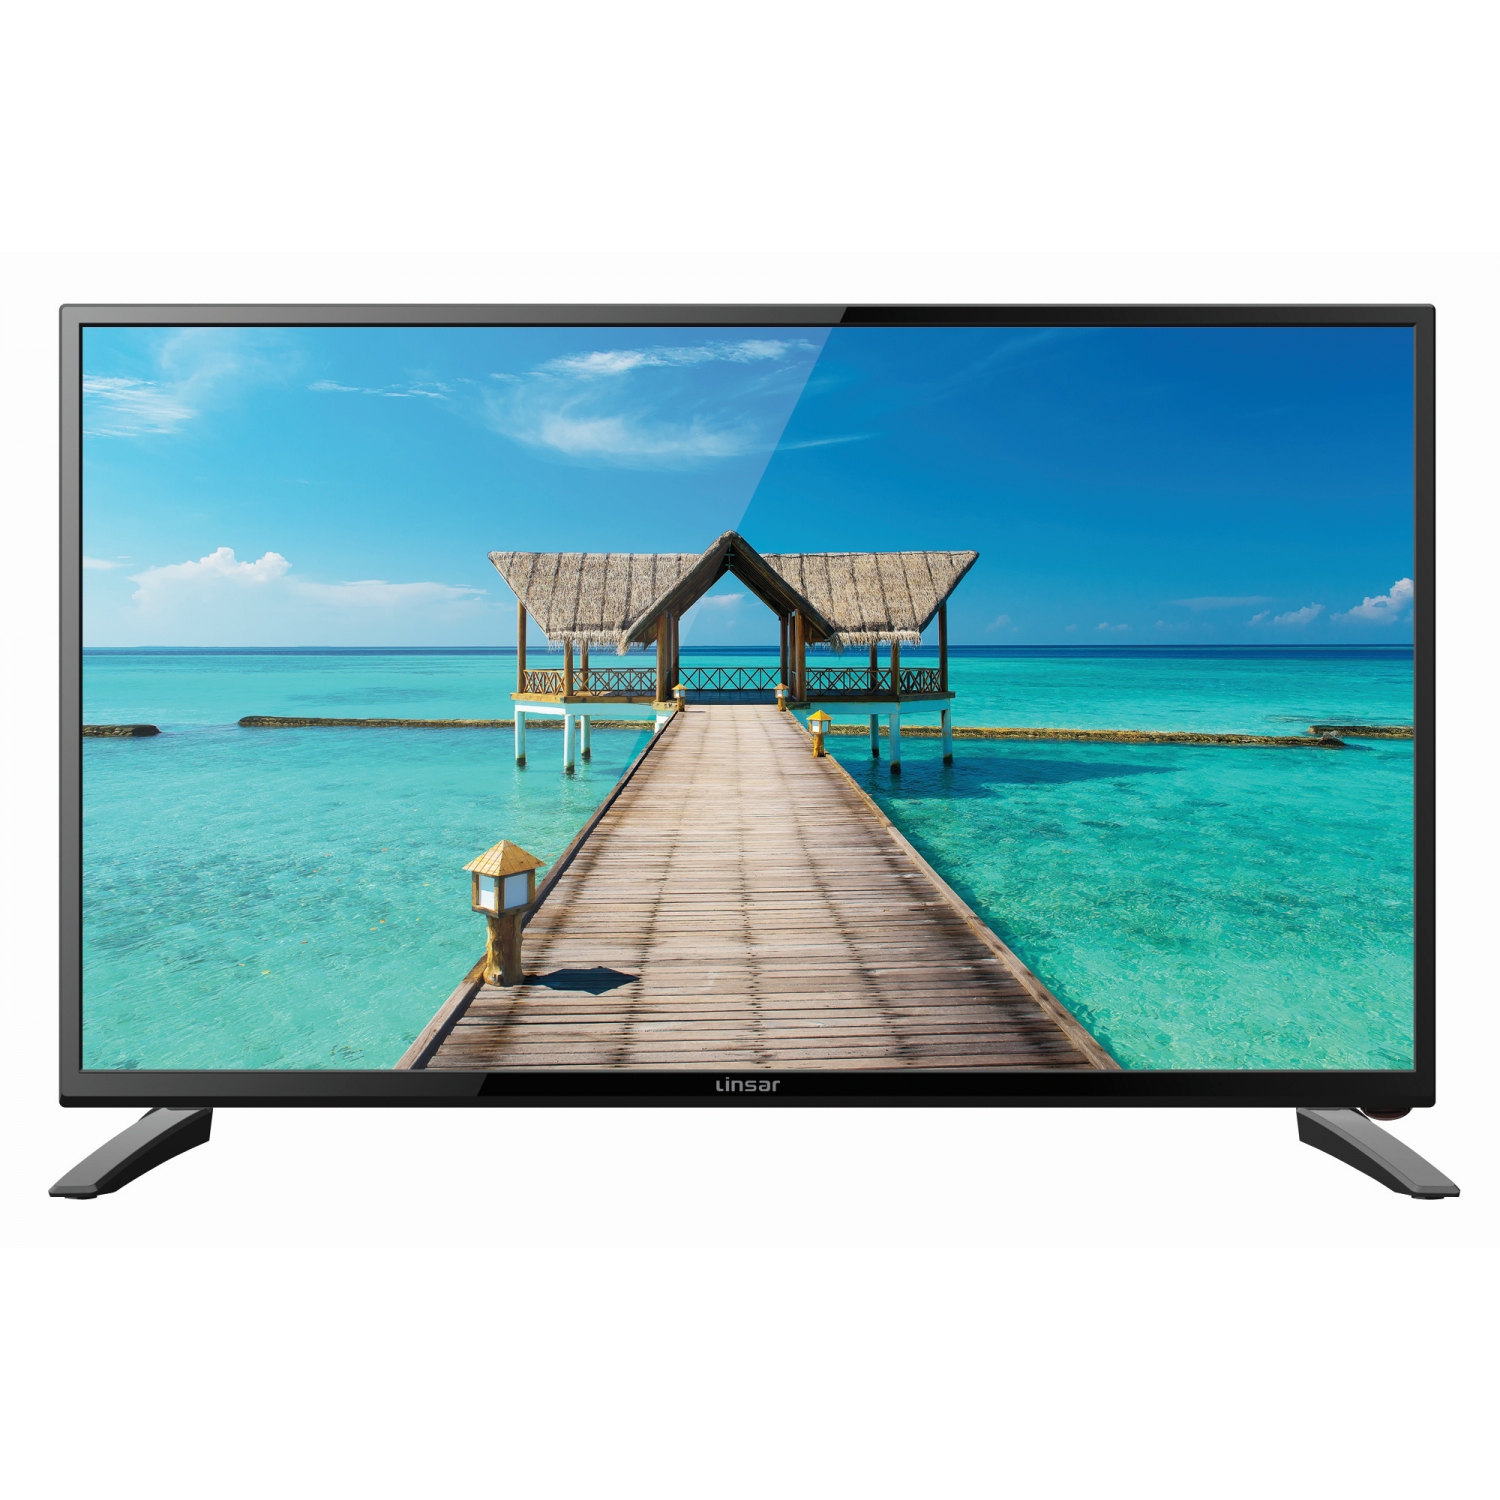 Linsar 27624LED700 24" HD Ready TV with Built In DVD Player - 0